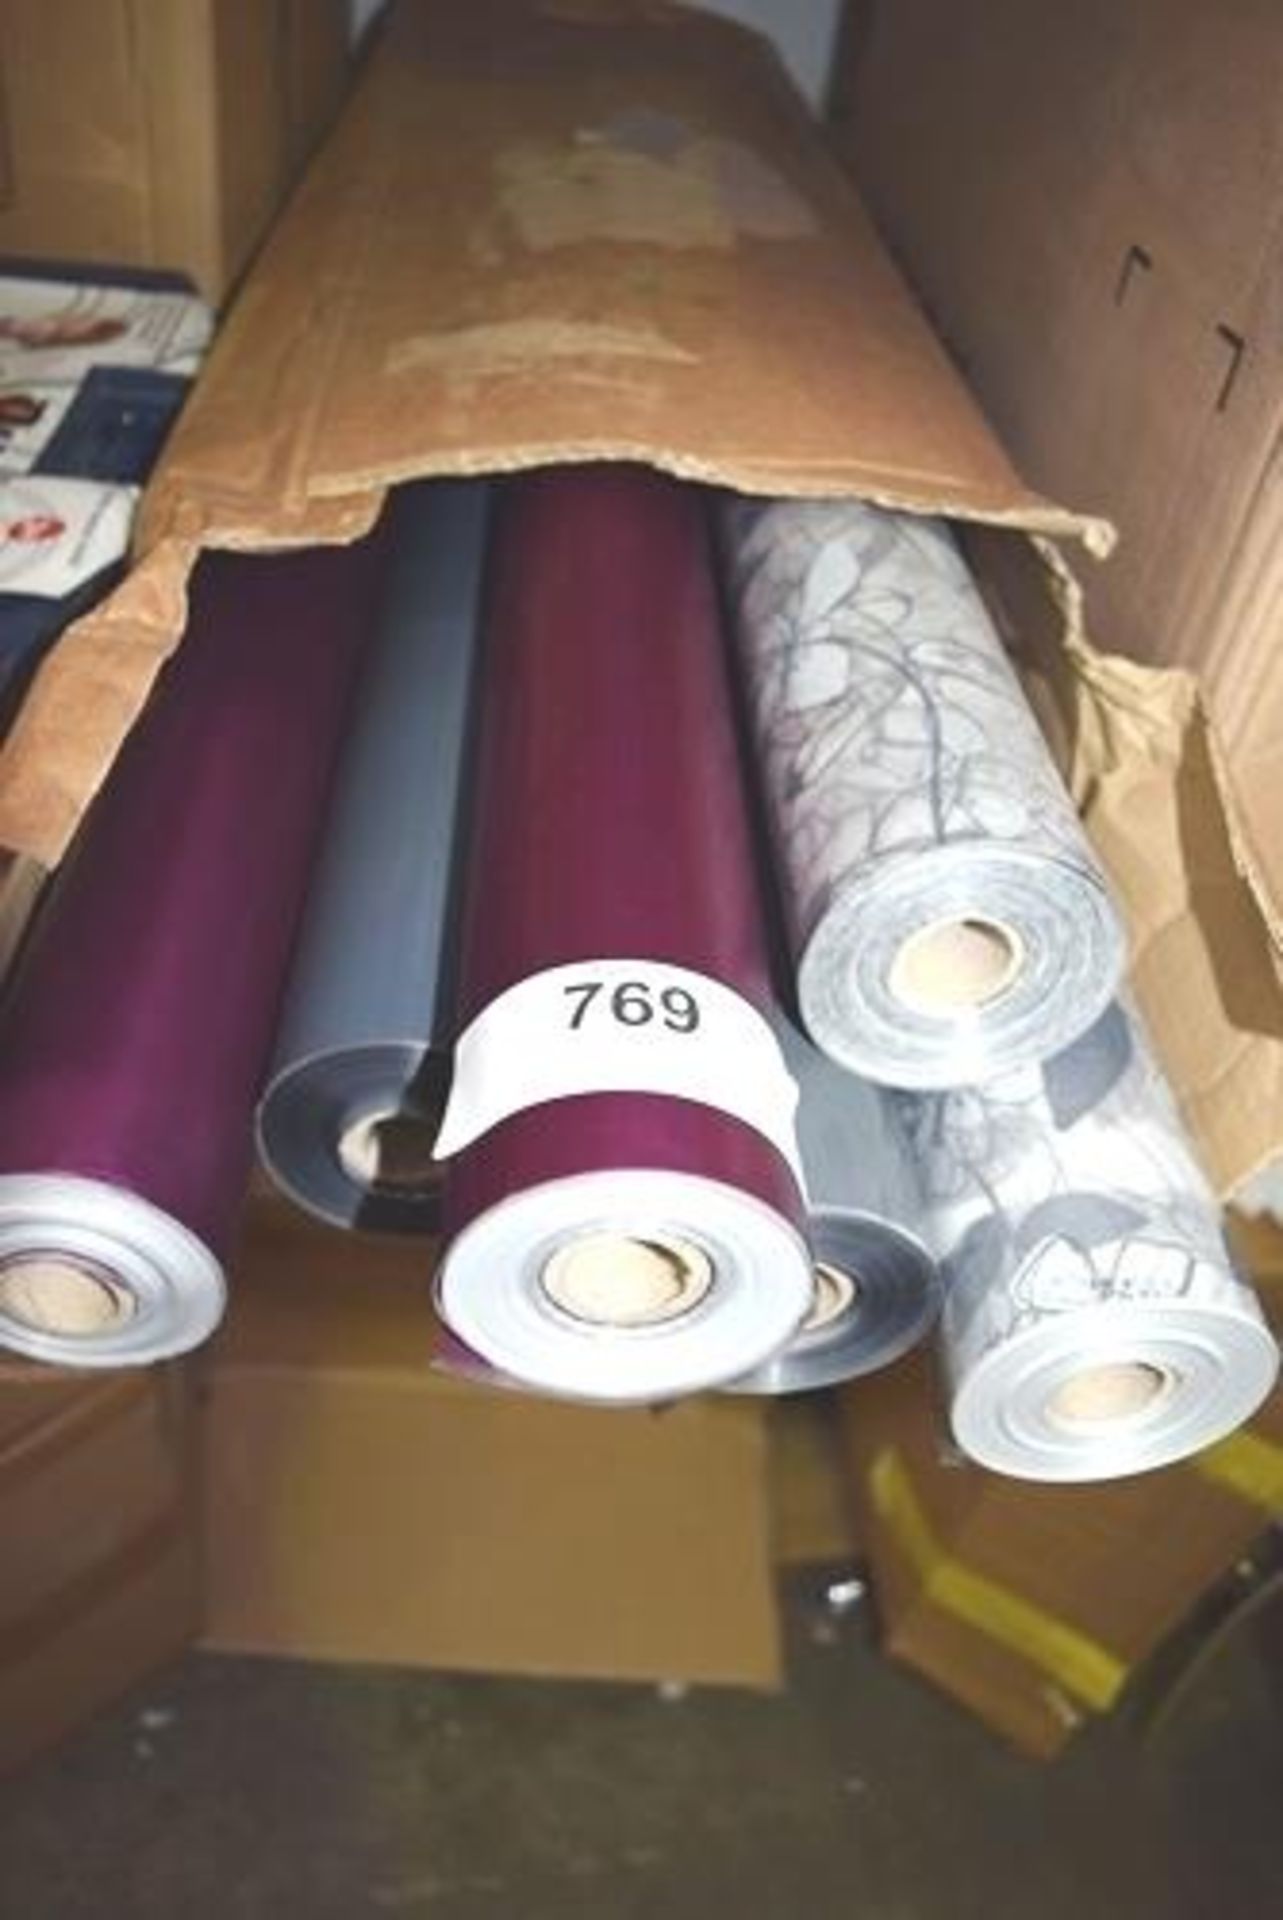 6 x rolls of florist wrapping - New (GS20)